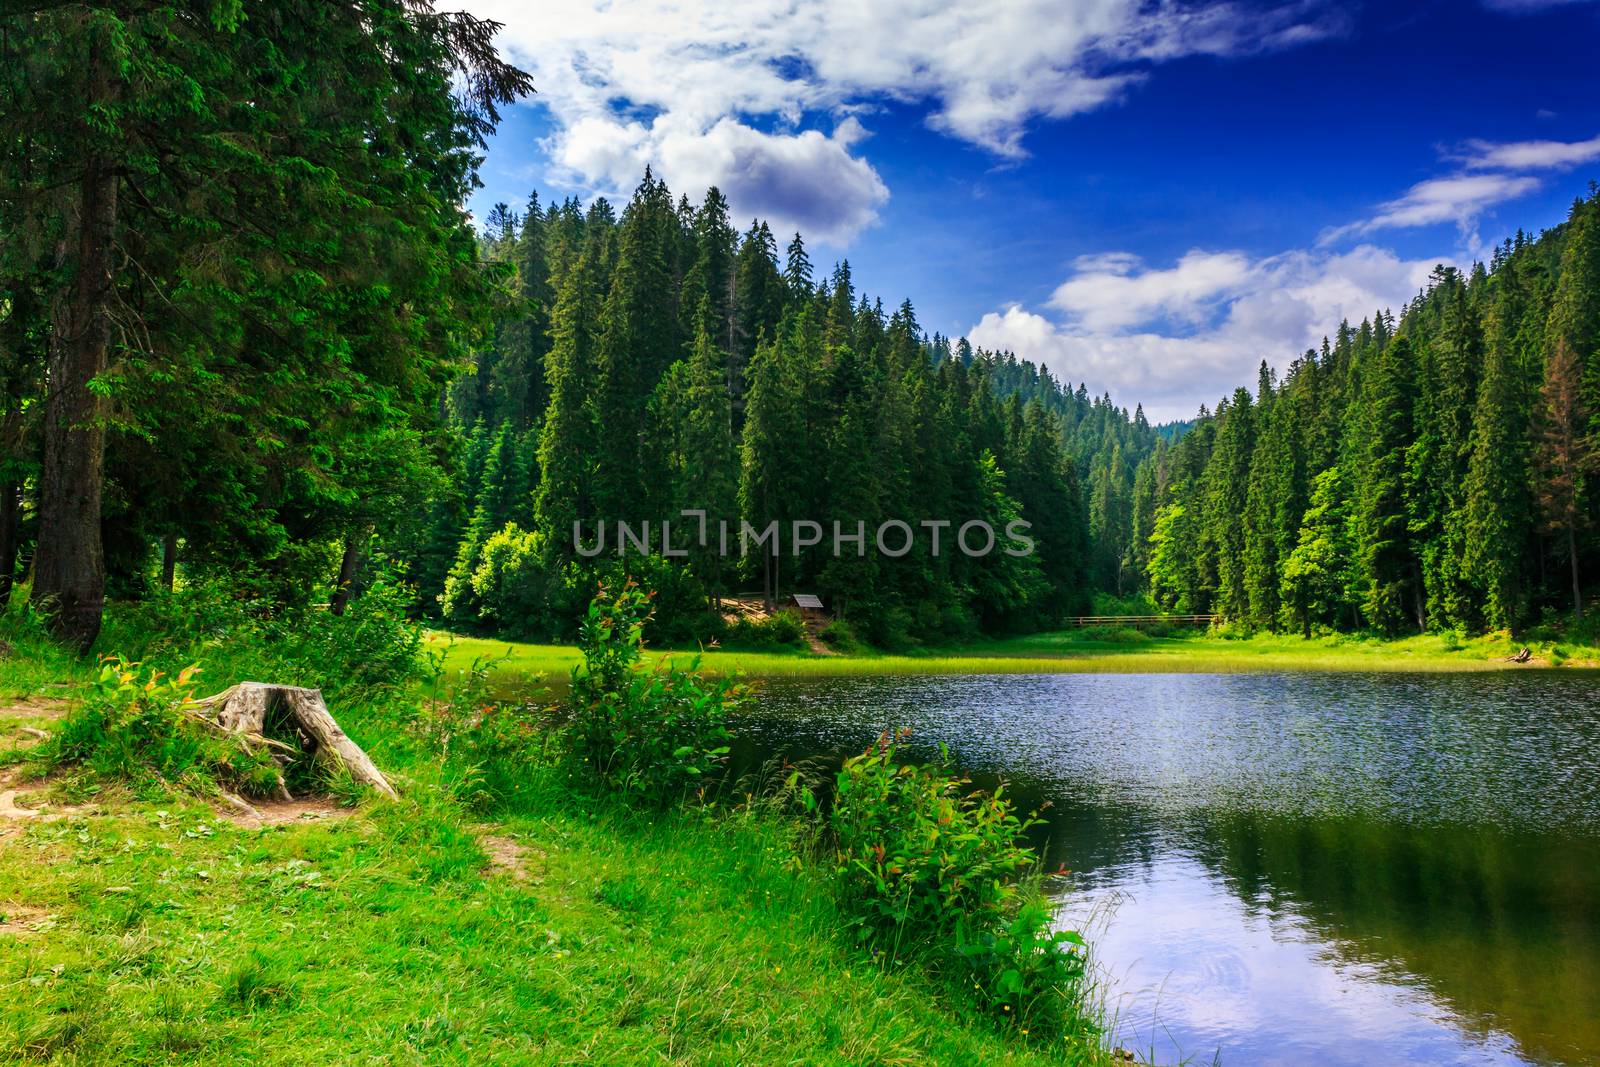 stump and bush on the bank of a lake in a mountainous coniferous forest